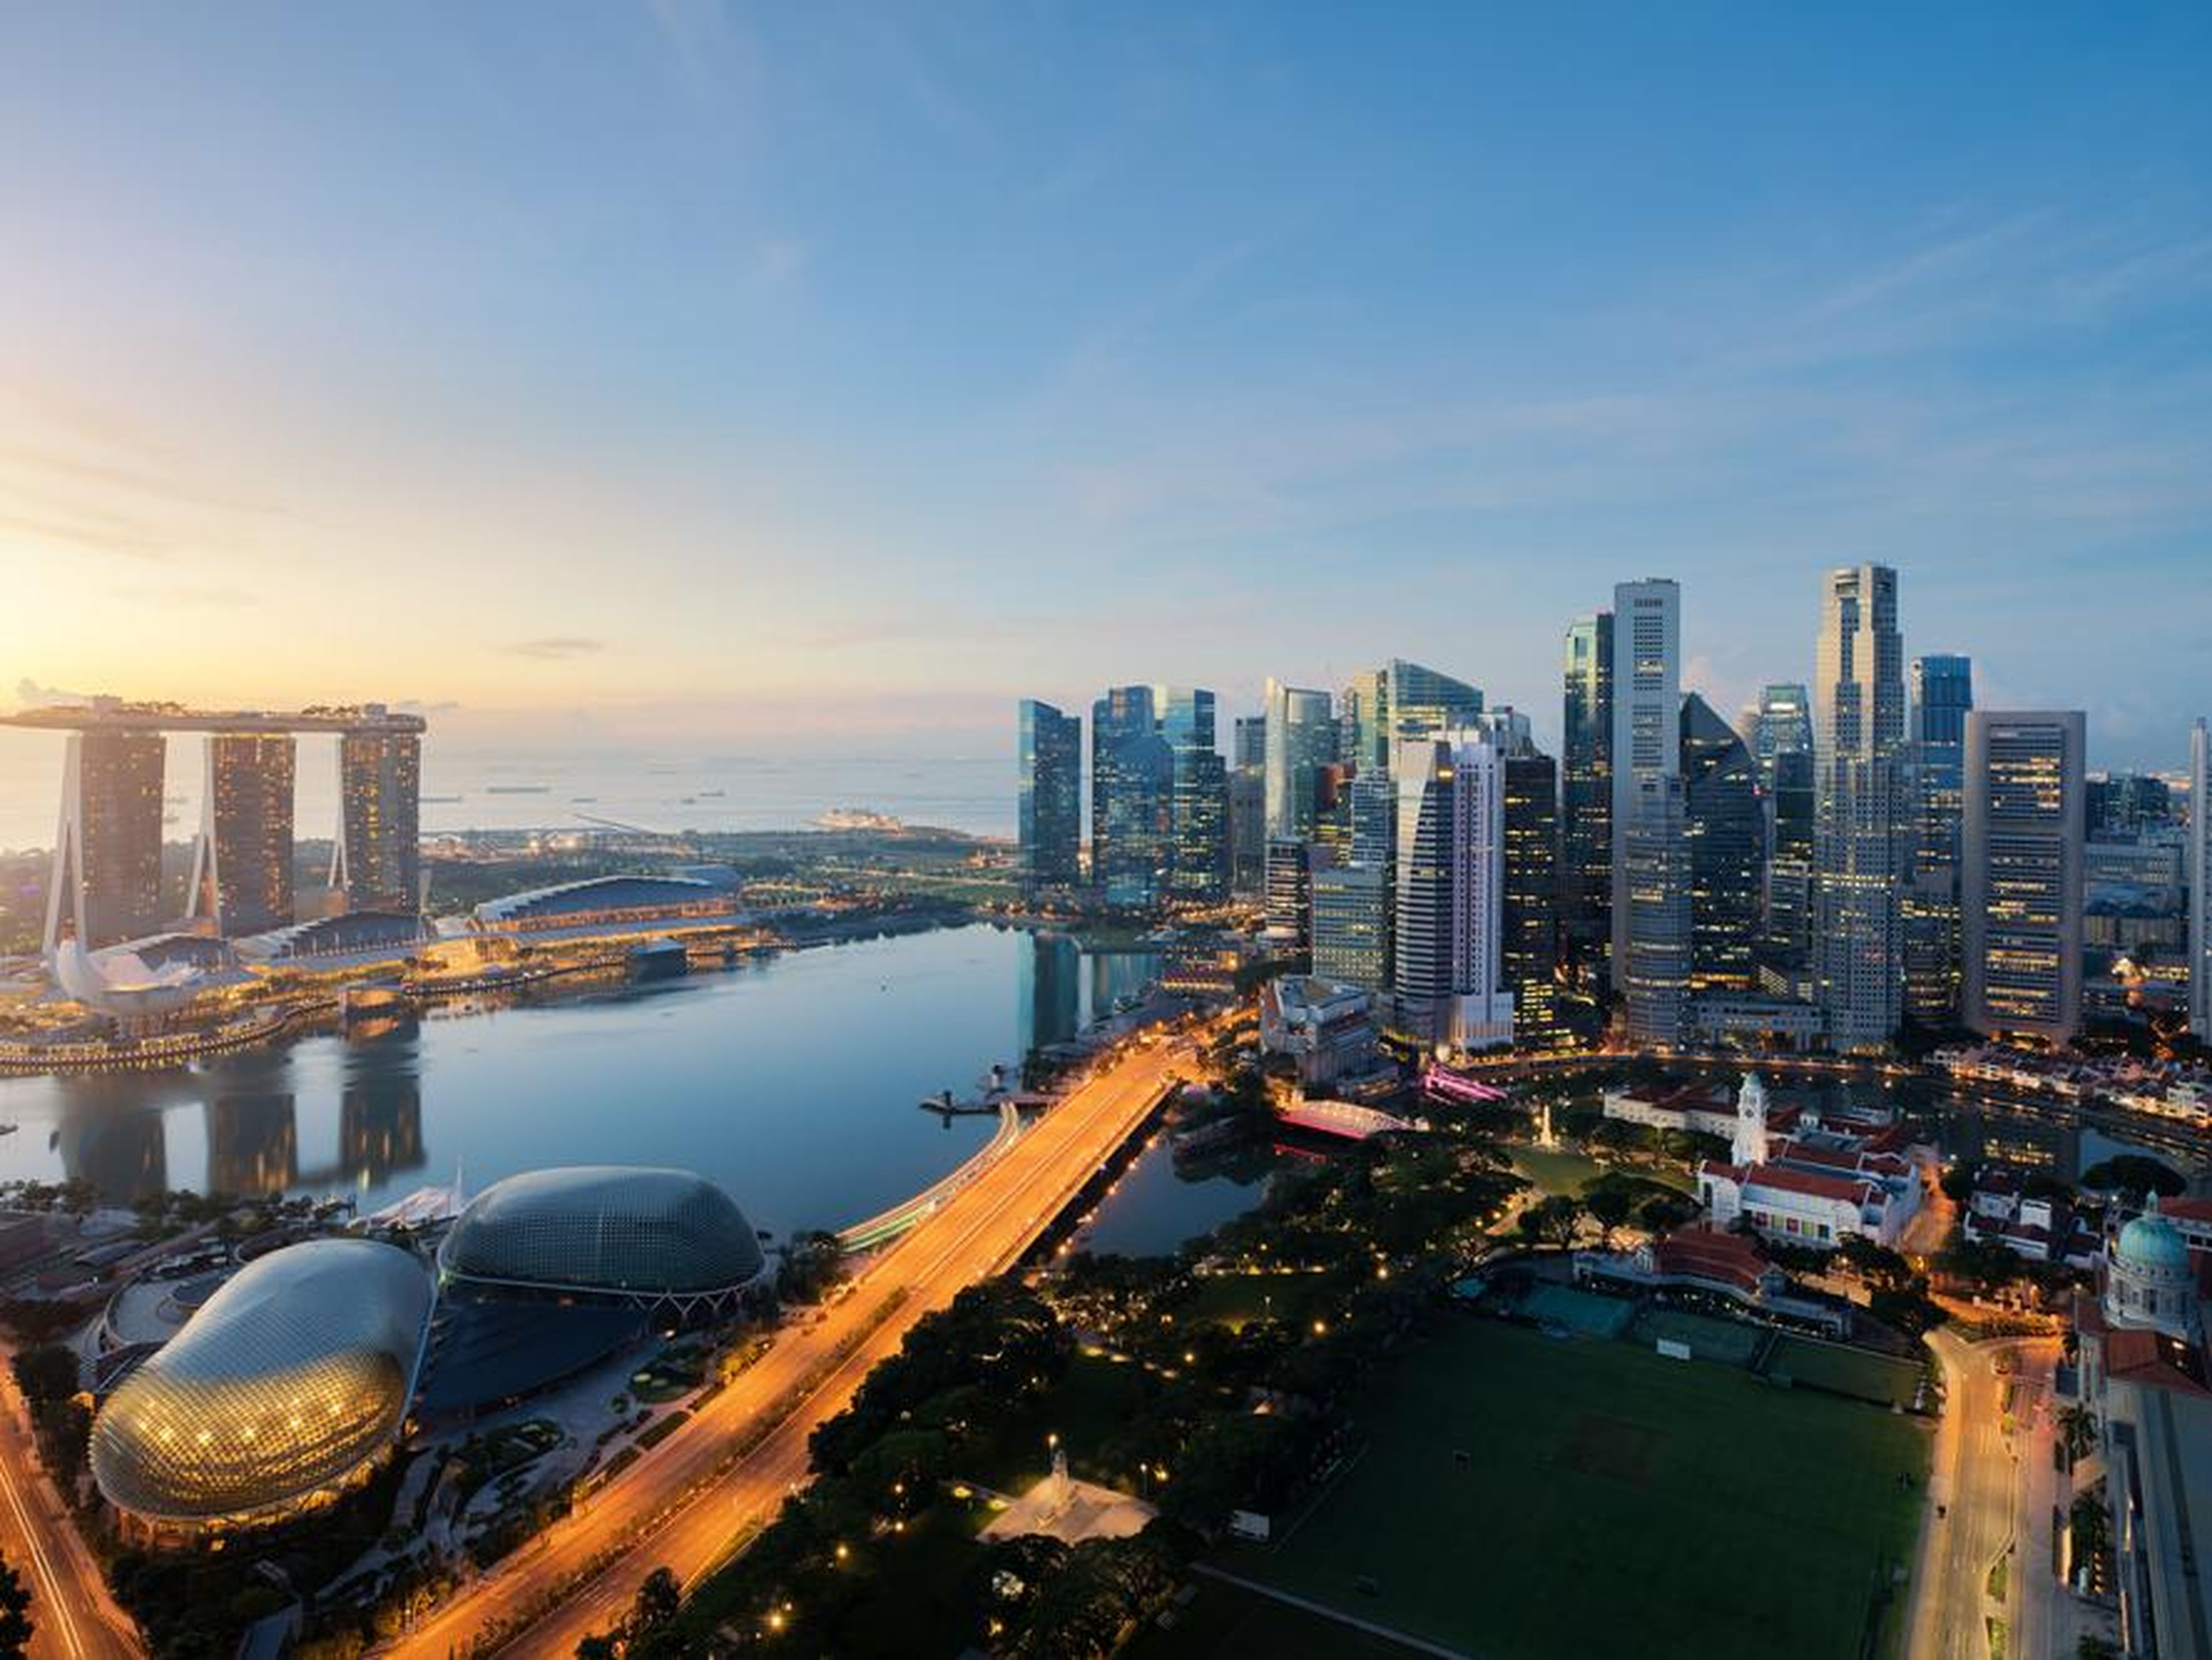 Singapore remains the world's most expensive city, but shares its title with Paris and Hong Kong this year.